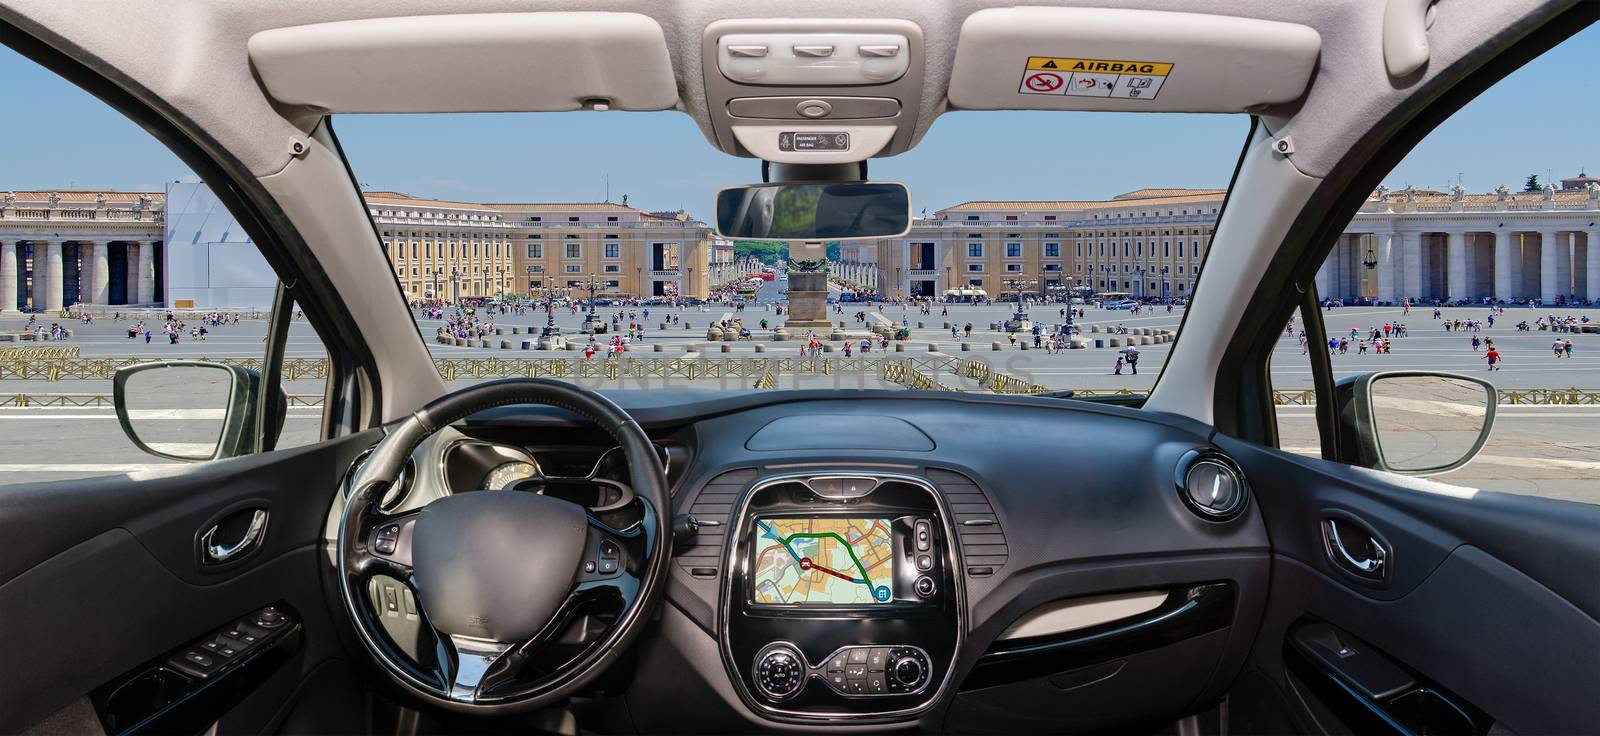 Car windshield with Saint Peter's Square, Vatican City, Rome, It by marcorubino